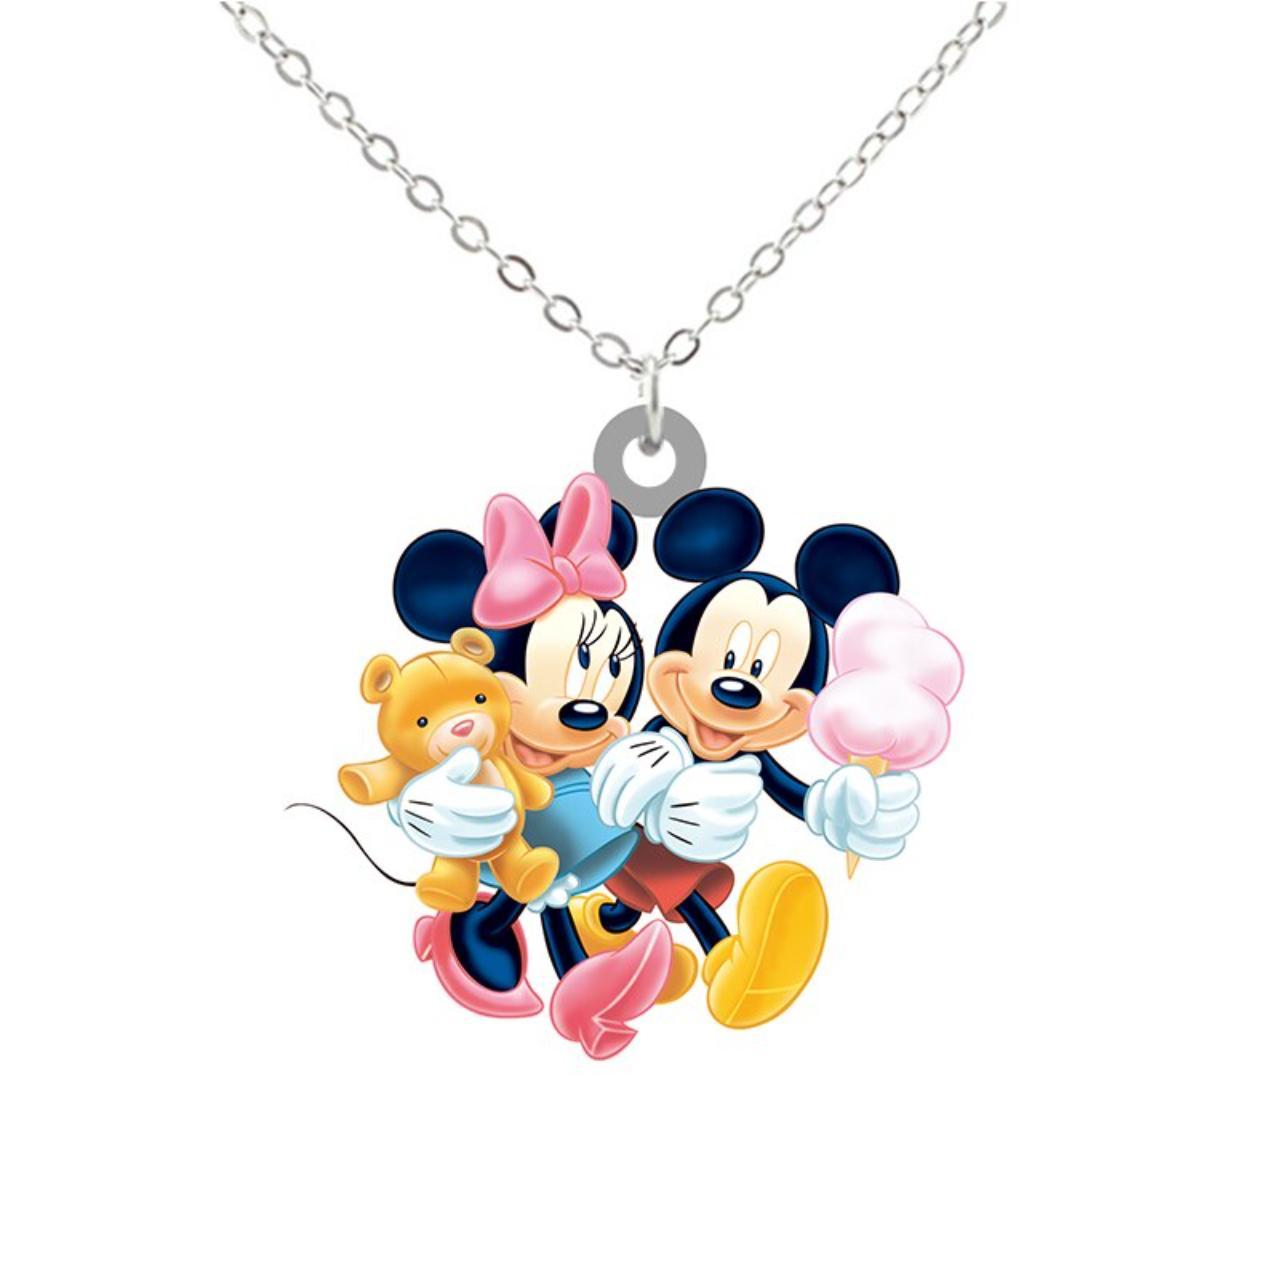 Buy Mickey Minnie Mouse Disneyland Sleeping Beauty Anniversary Castle Style  Silver Disney World Pendant Necklace Jewelry Online in India - Etsy